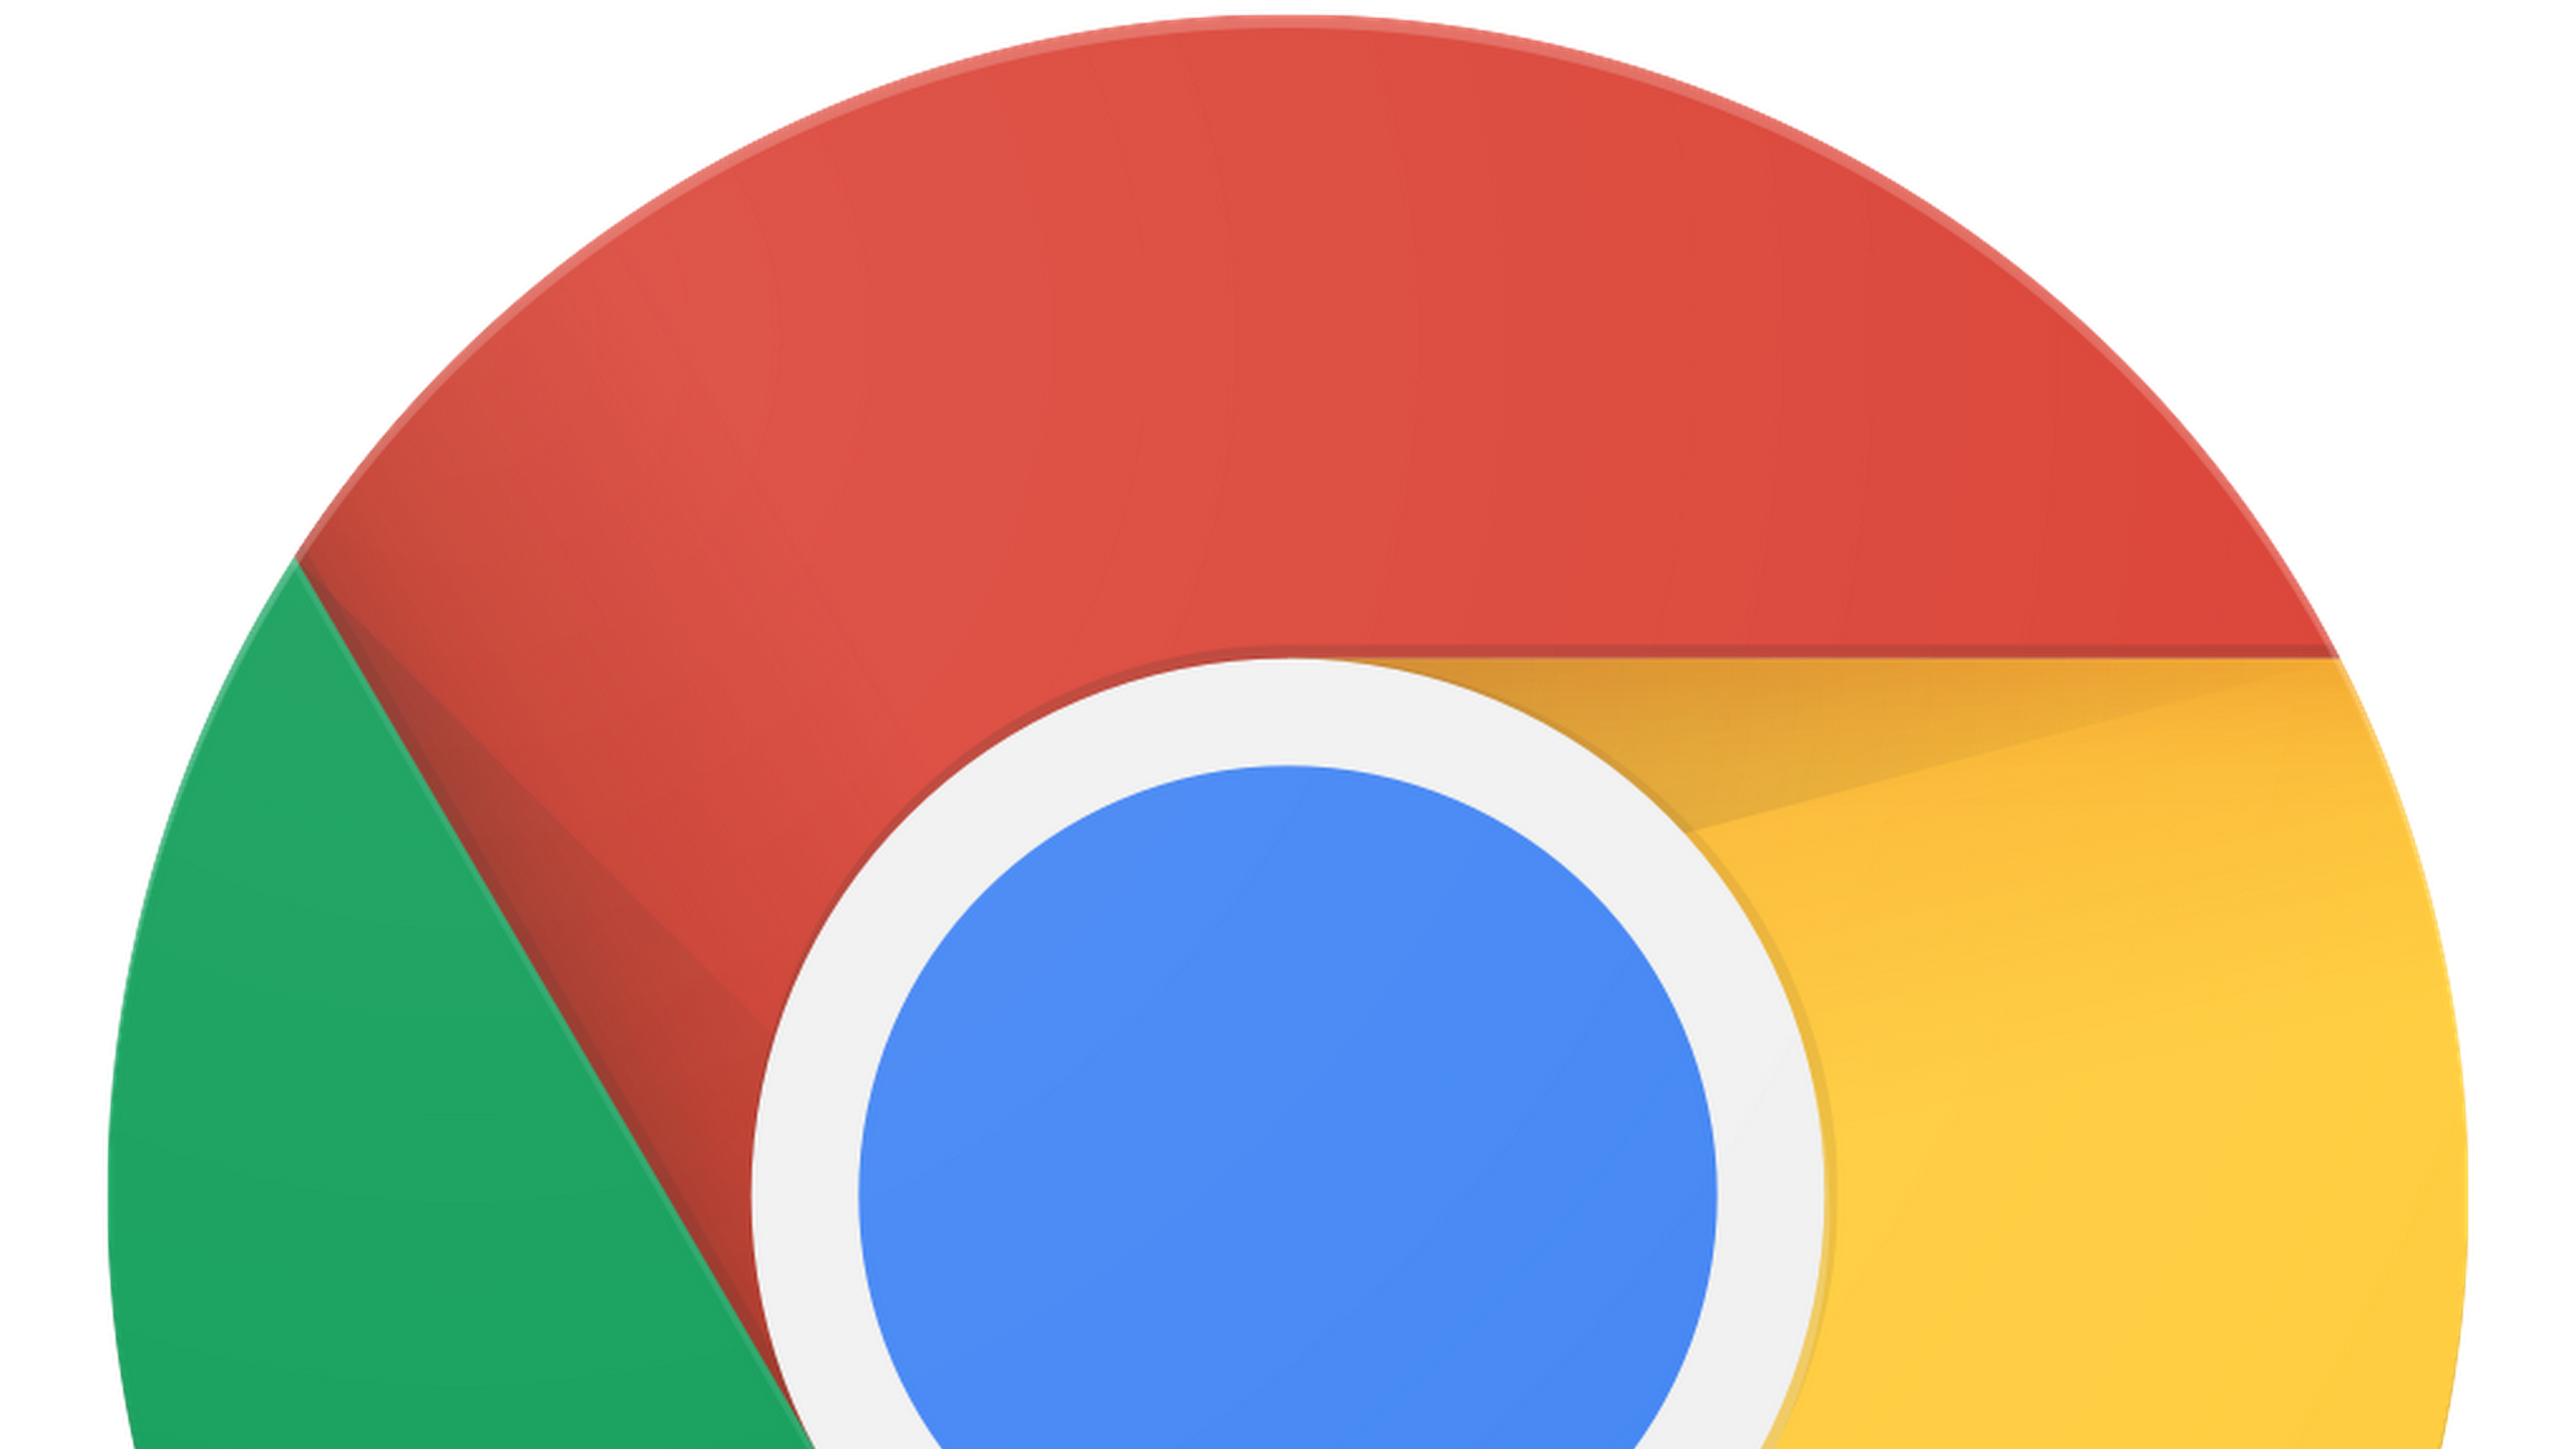 How To Get Early Access To Google Chrome’s New Safety And Design Updates